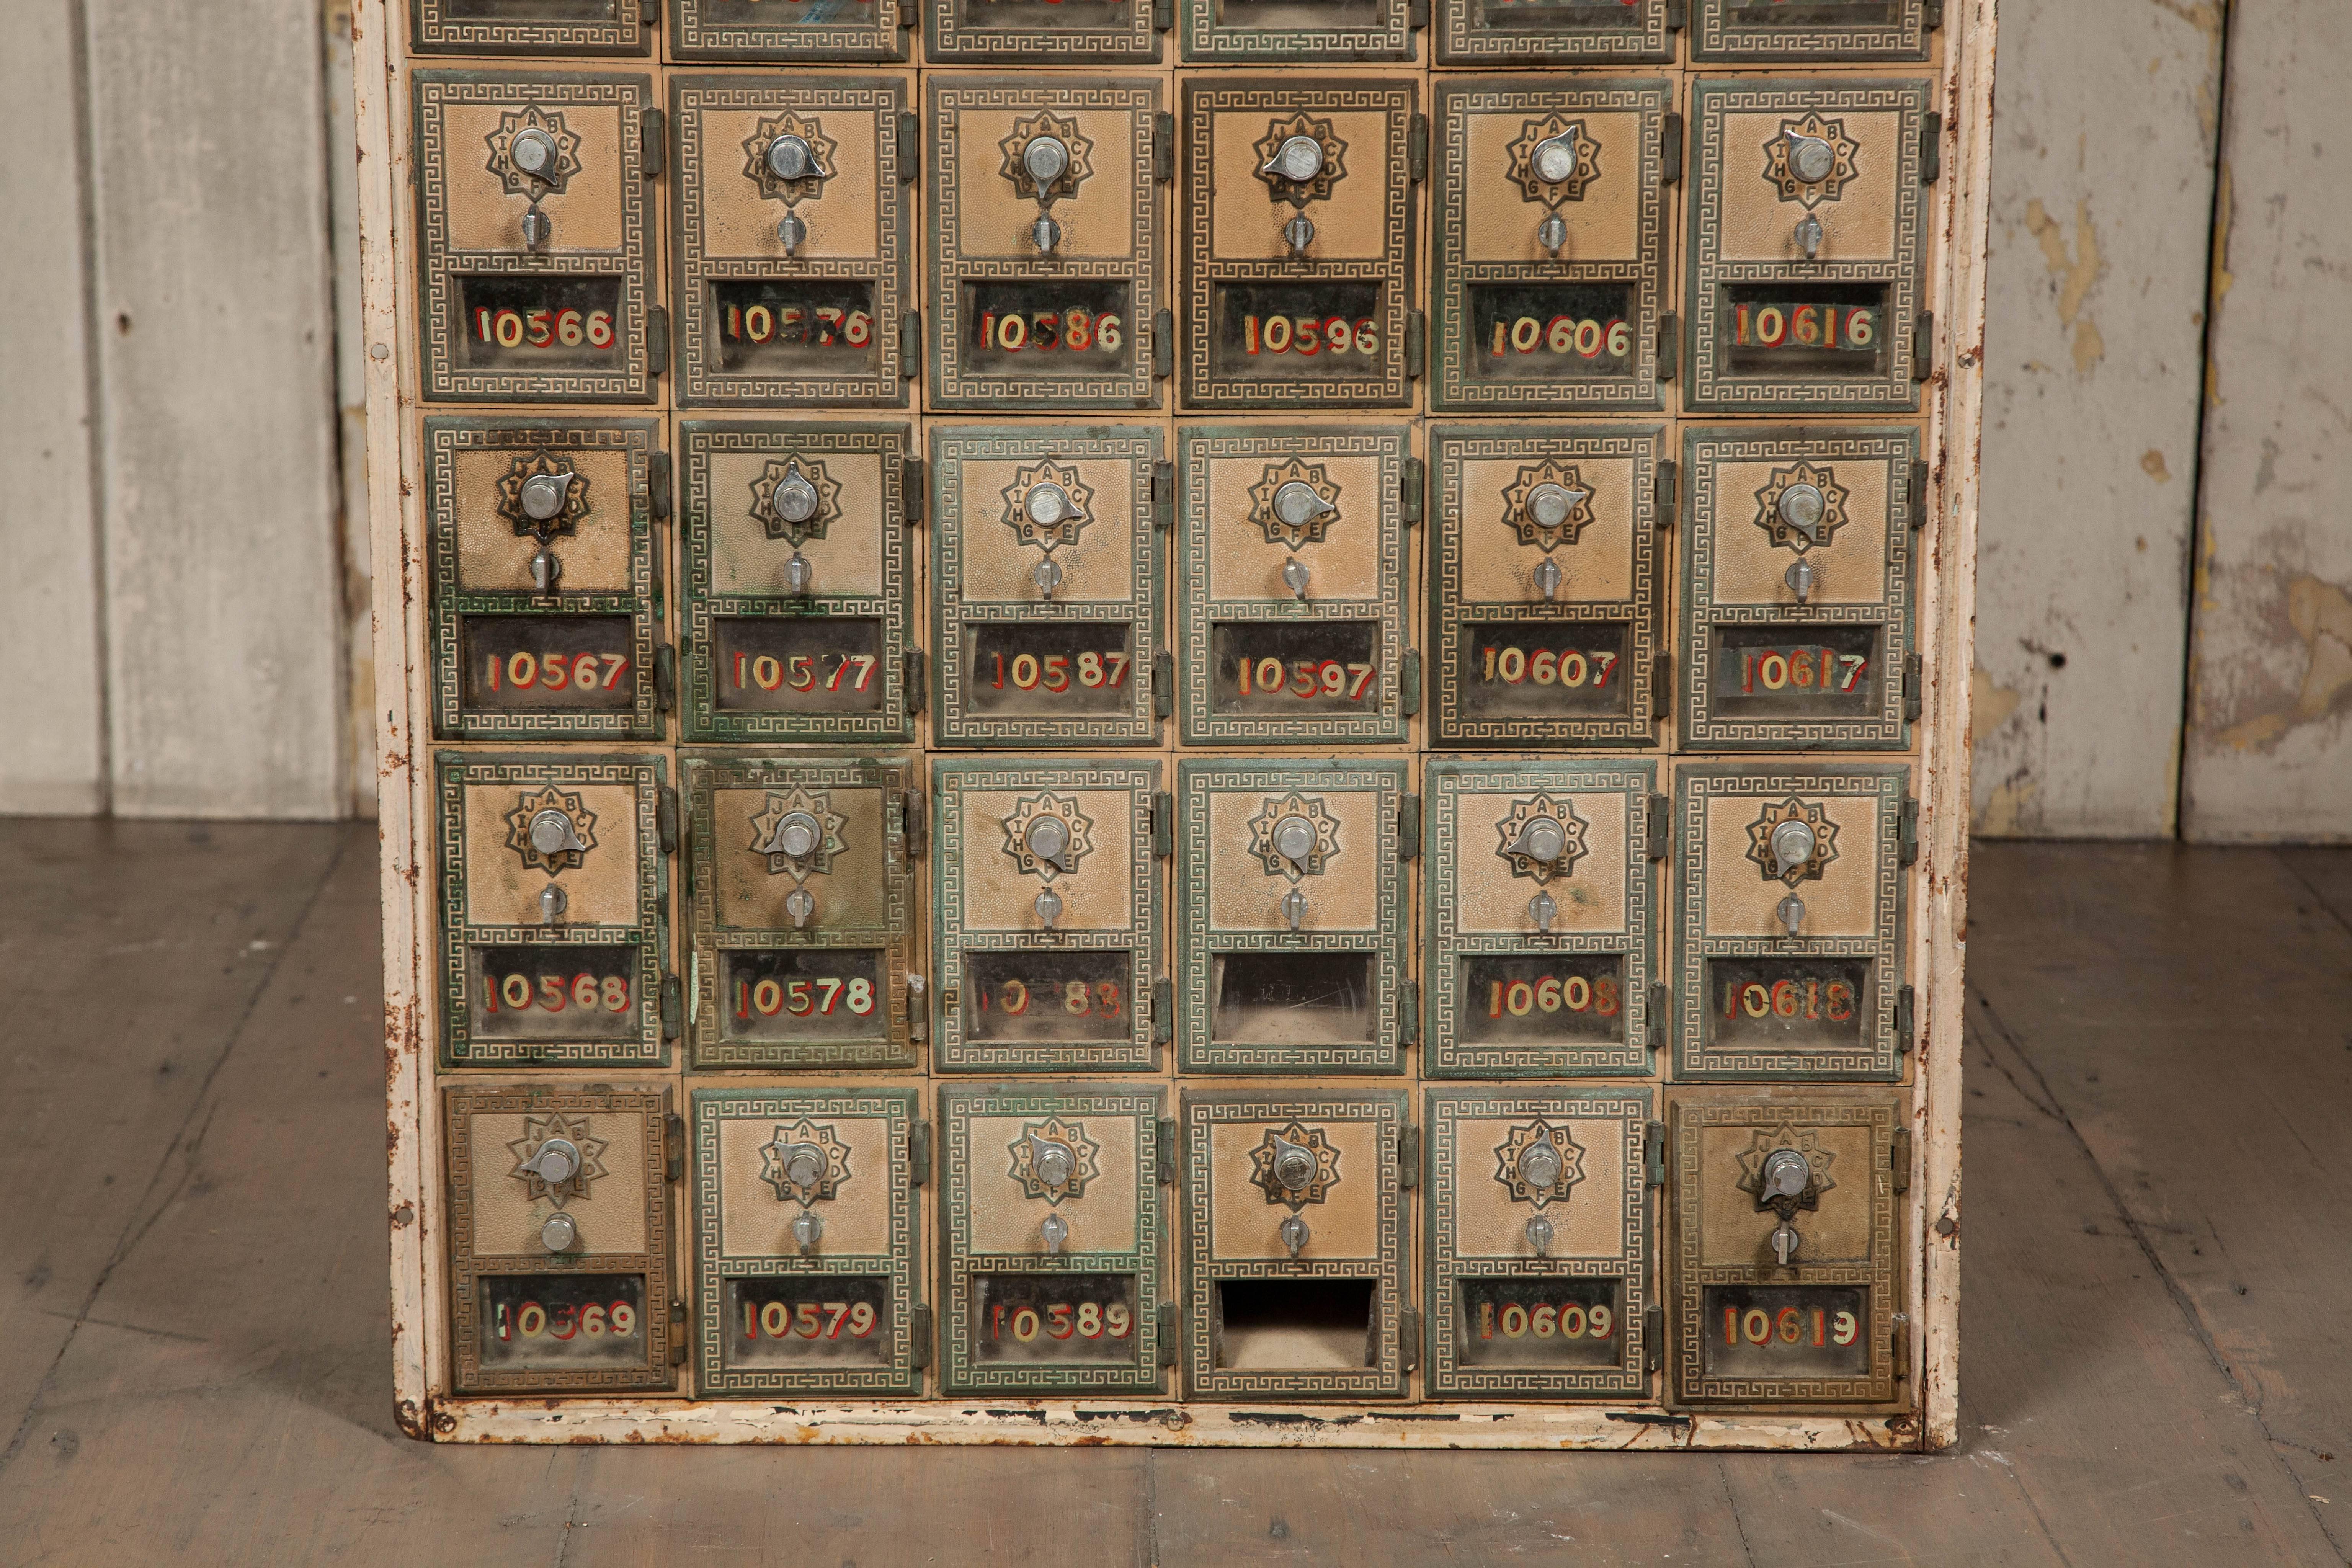 A bank of US Post Office mail boxes salvaged from a former US army barracks. The cabinet has a total of 54 numbered compartments. The lockers are decorated with a greek key border with the original numbers painted on the glass of most. 

We have